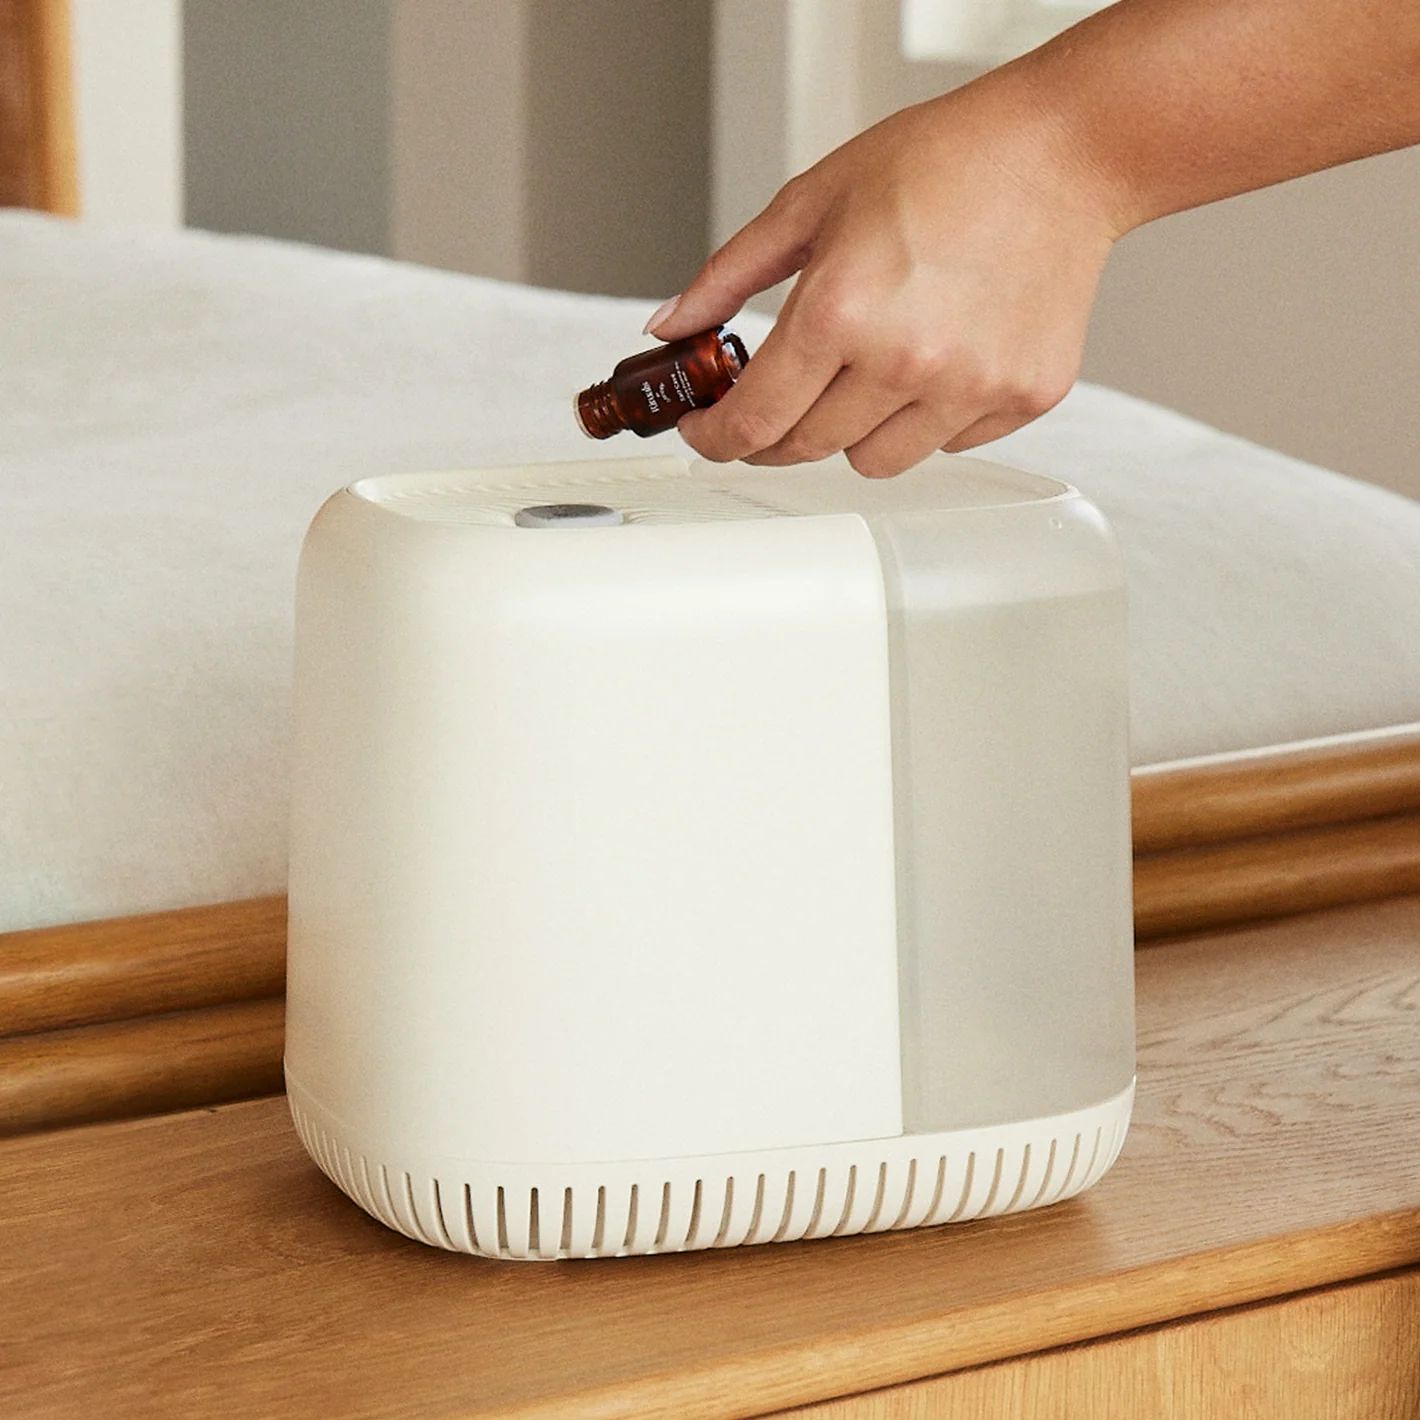 Canopy Humidifier | Best Humidifier for Dry Skin - Smart Humidifier | Canopy